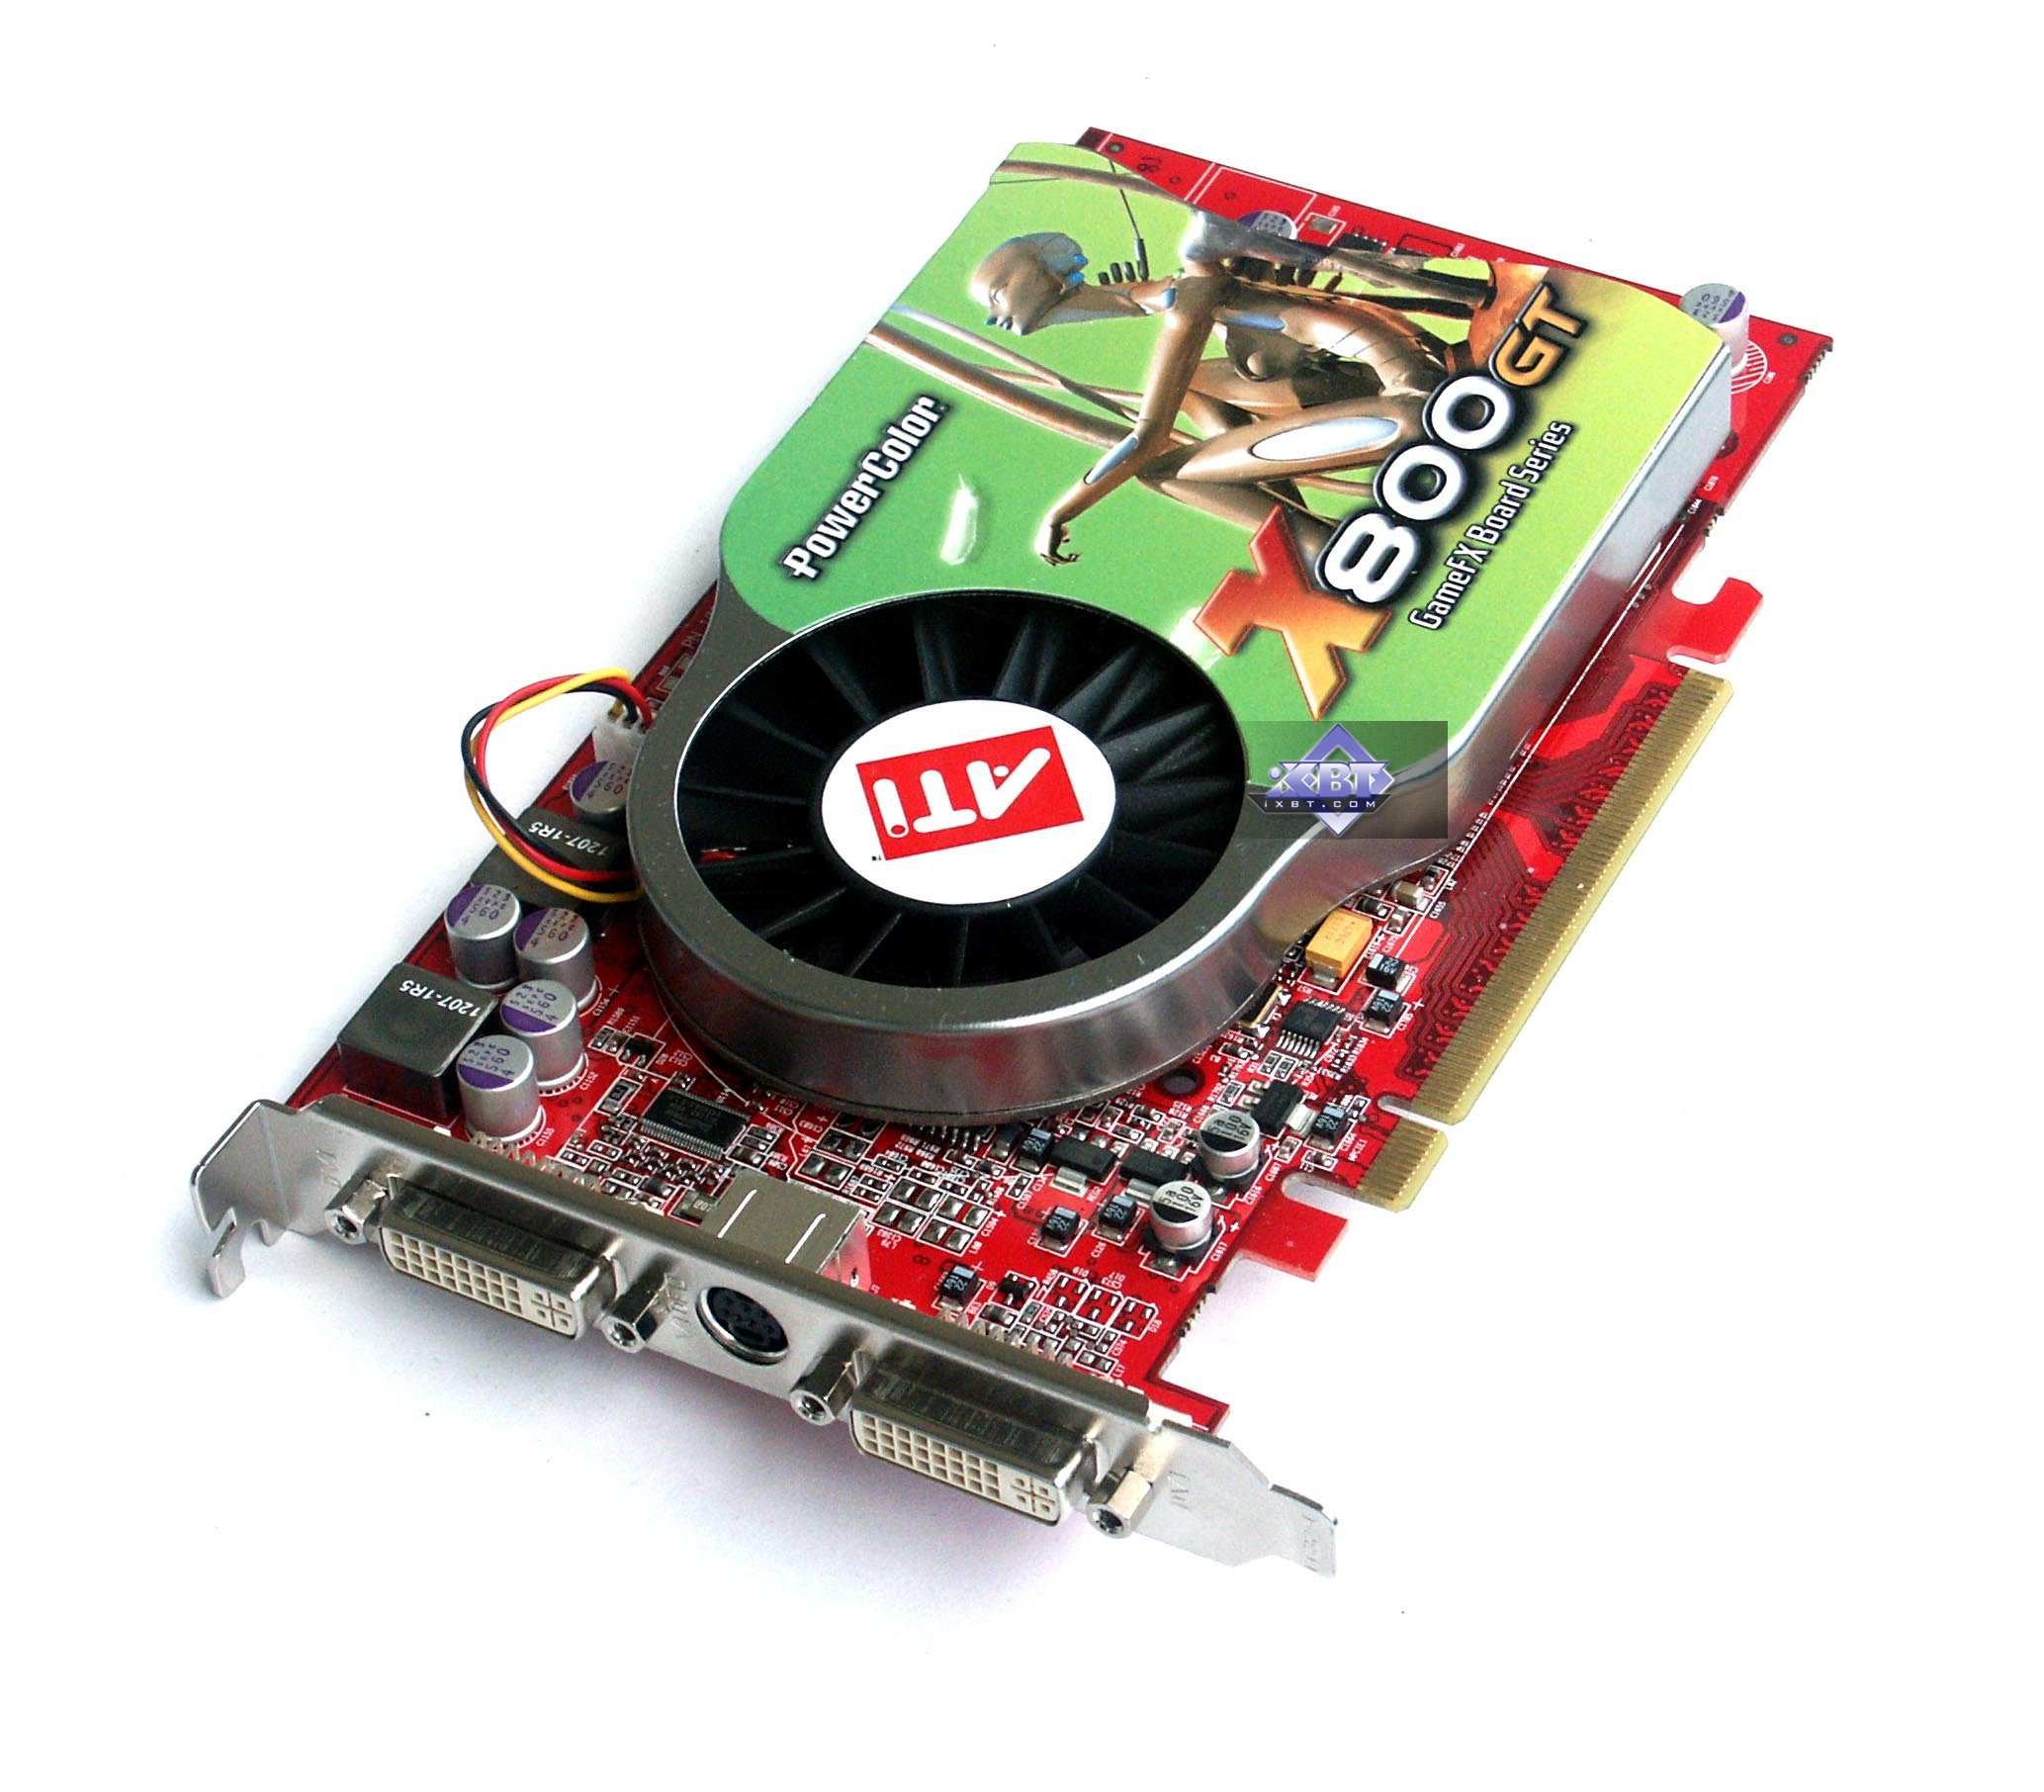 Mutual Cooperative acceleration RADEON X800 GT (R480) Represented by Video Cards from Sapphire, HIS, TUL